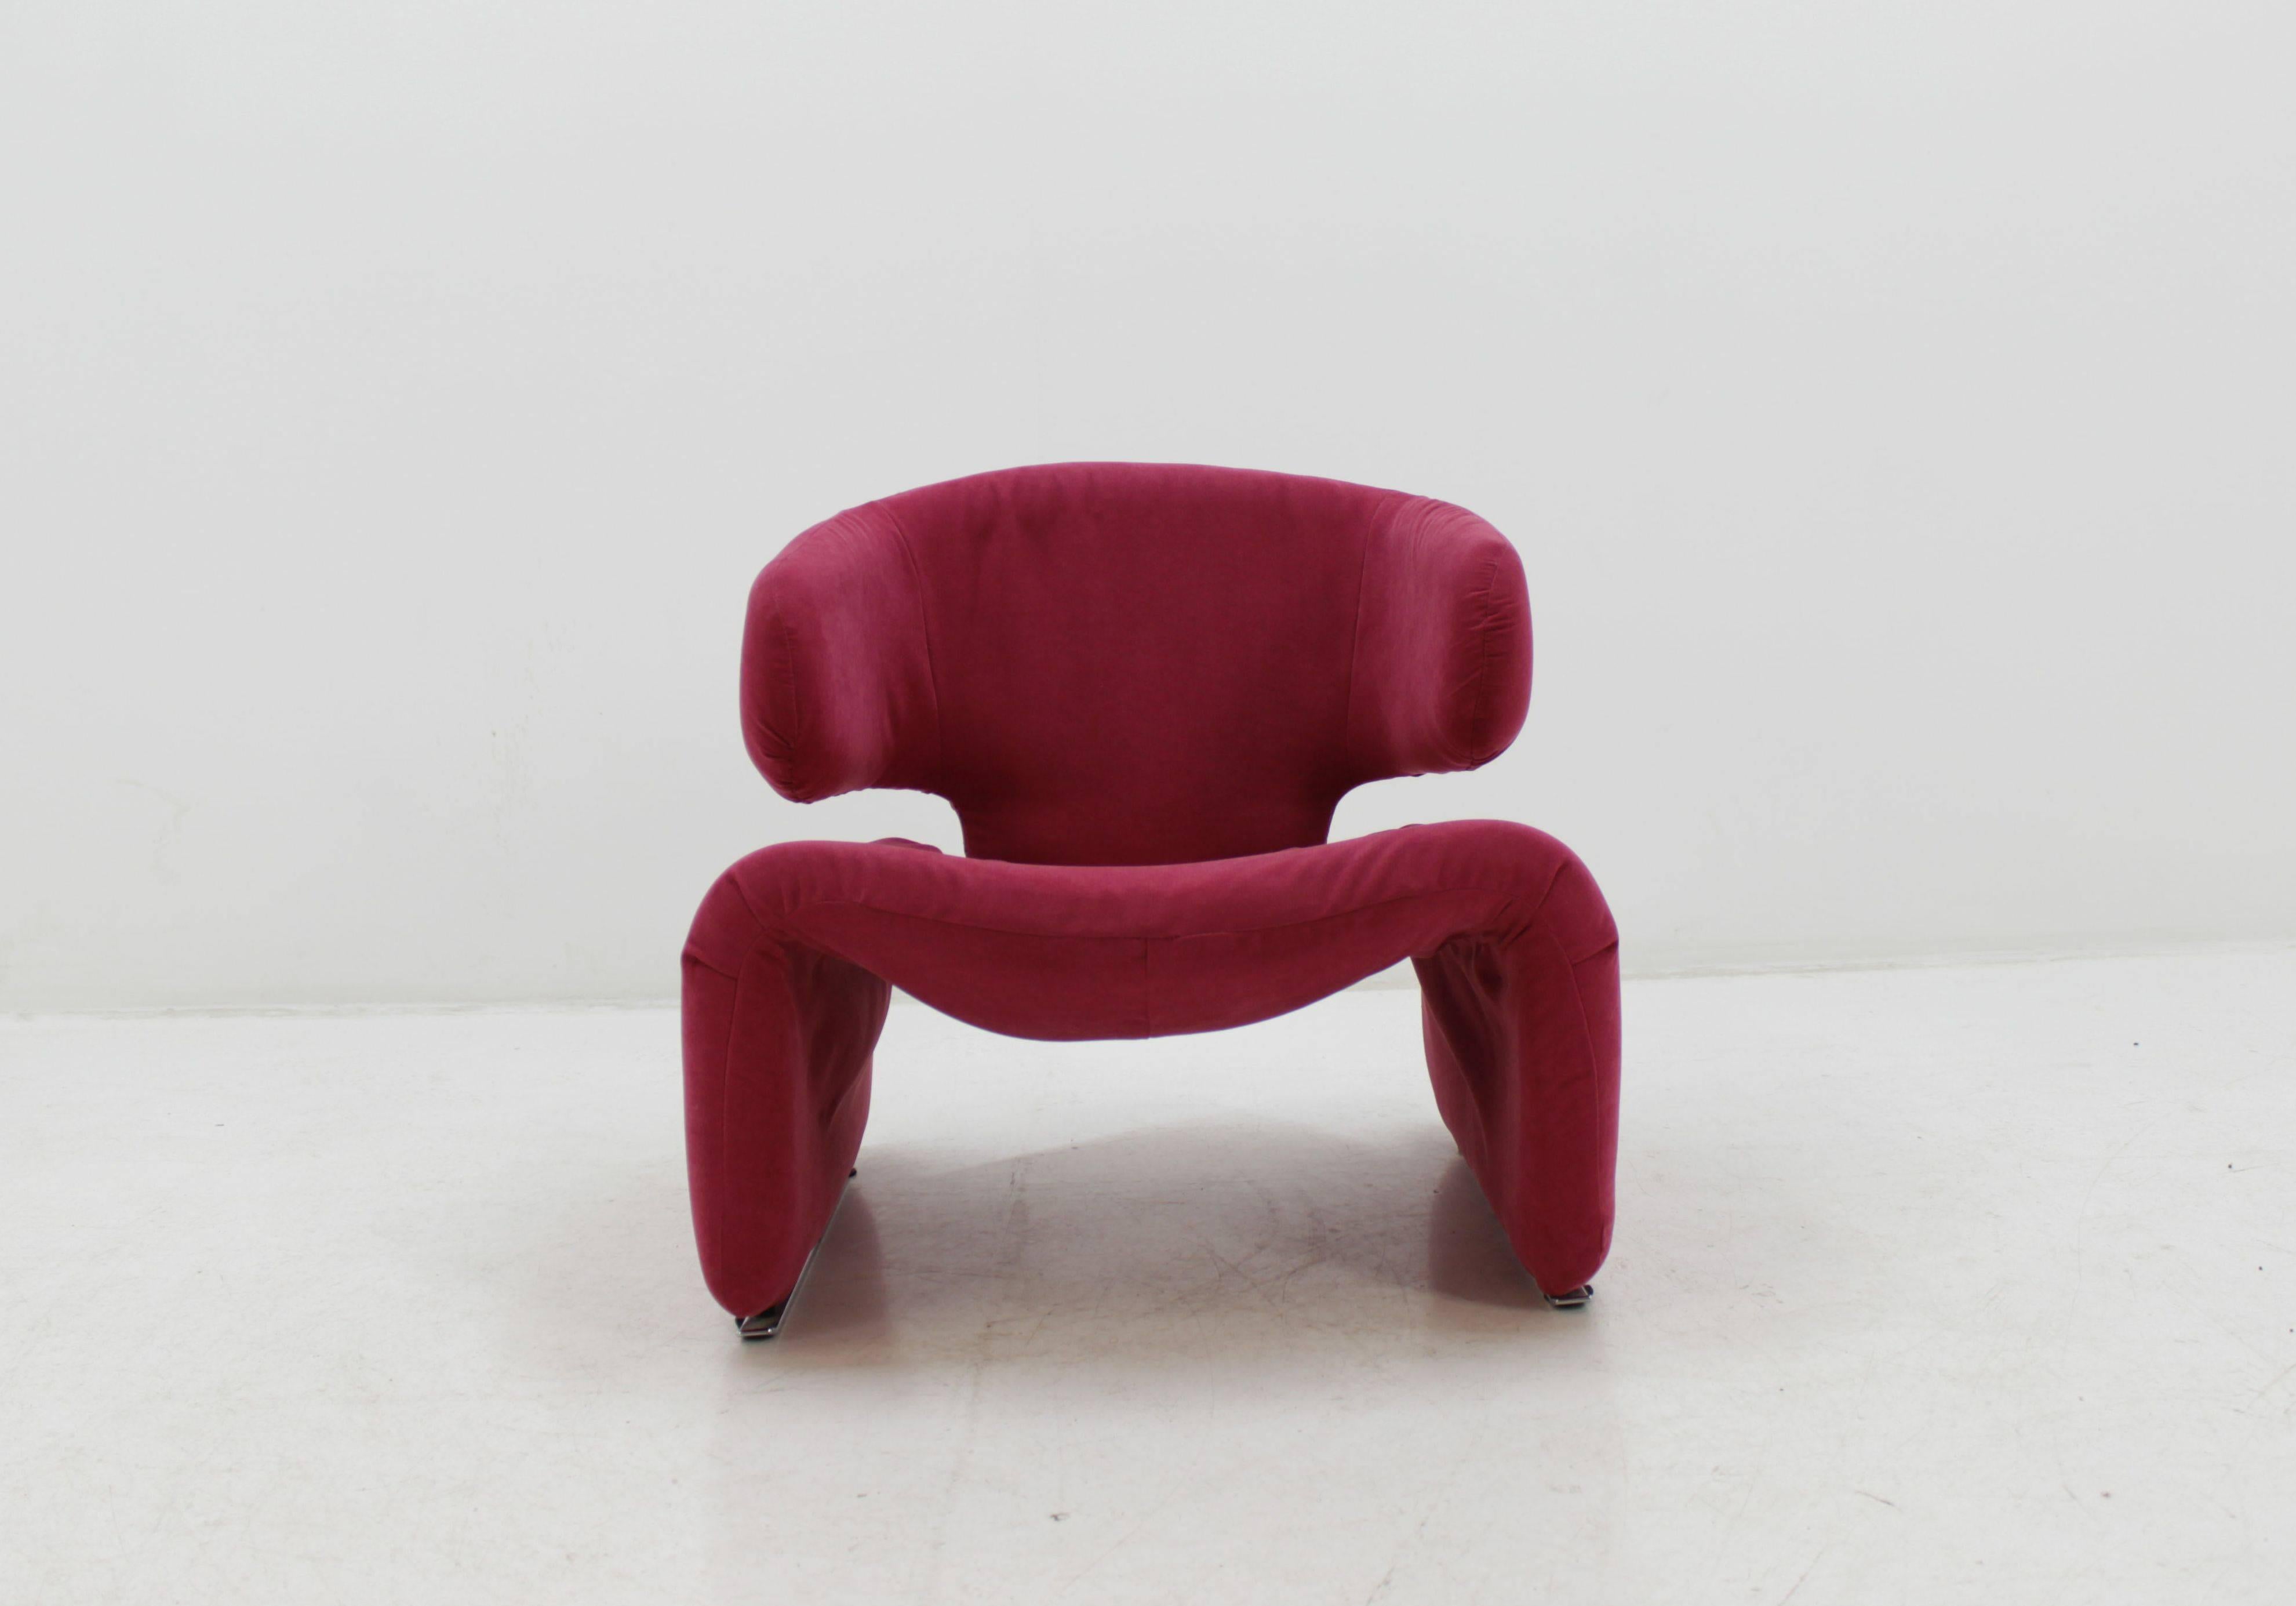 Midcentury Djinn lounge chair for Airborne designed by Olivier Mourgue, 1960s. Iconic chair in pink color. Very comfortable.